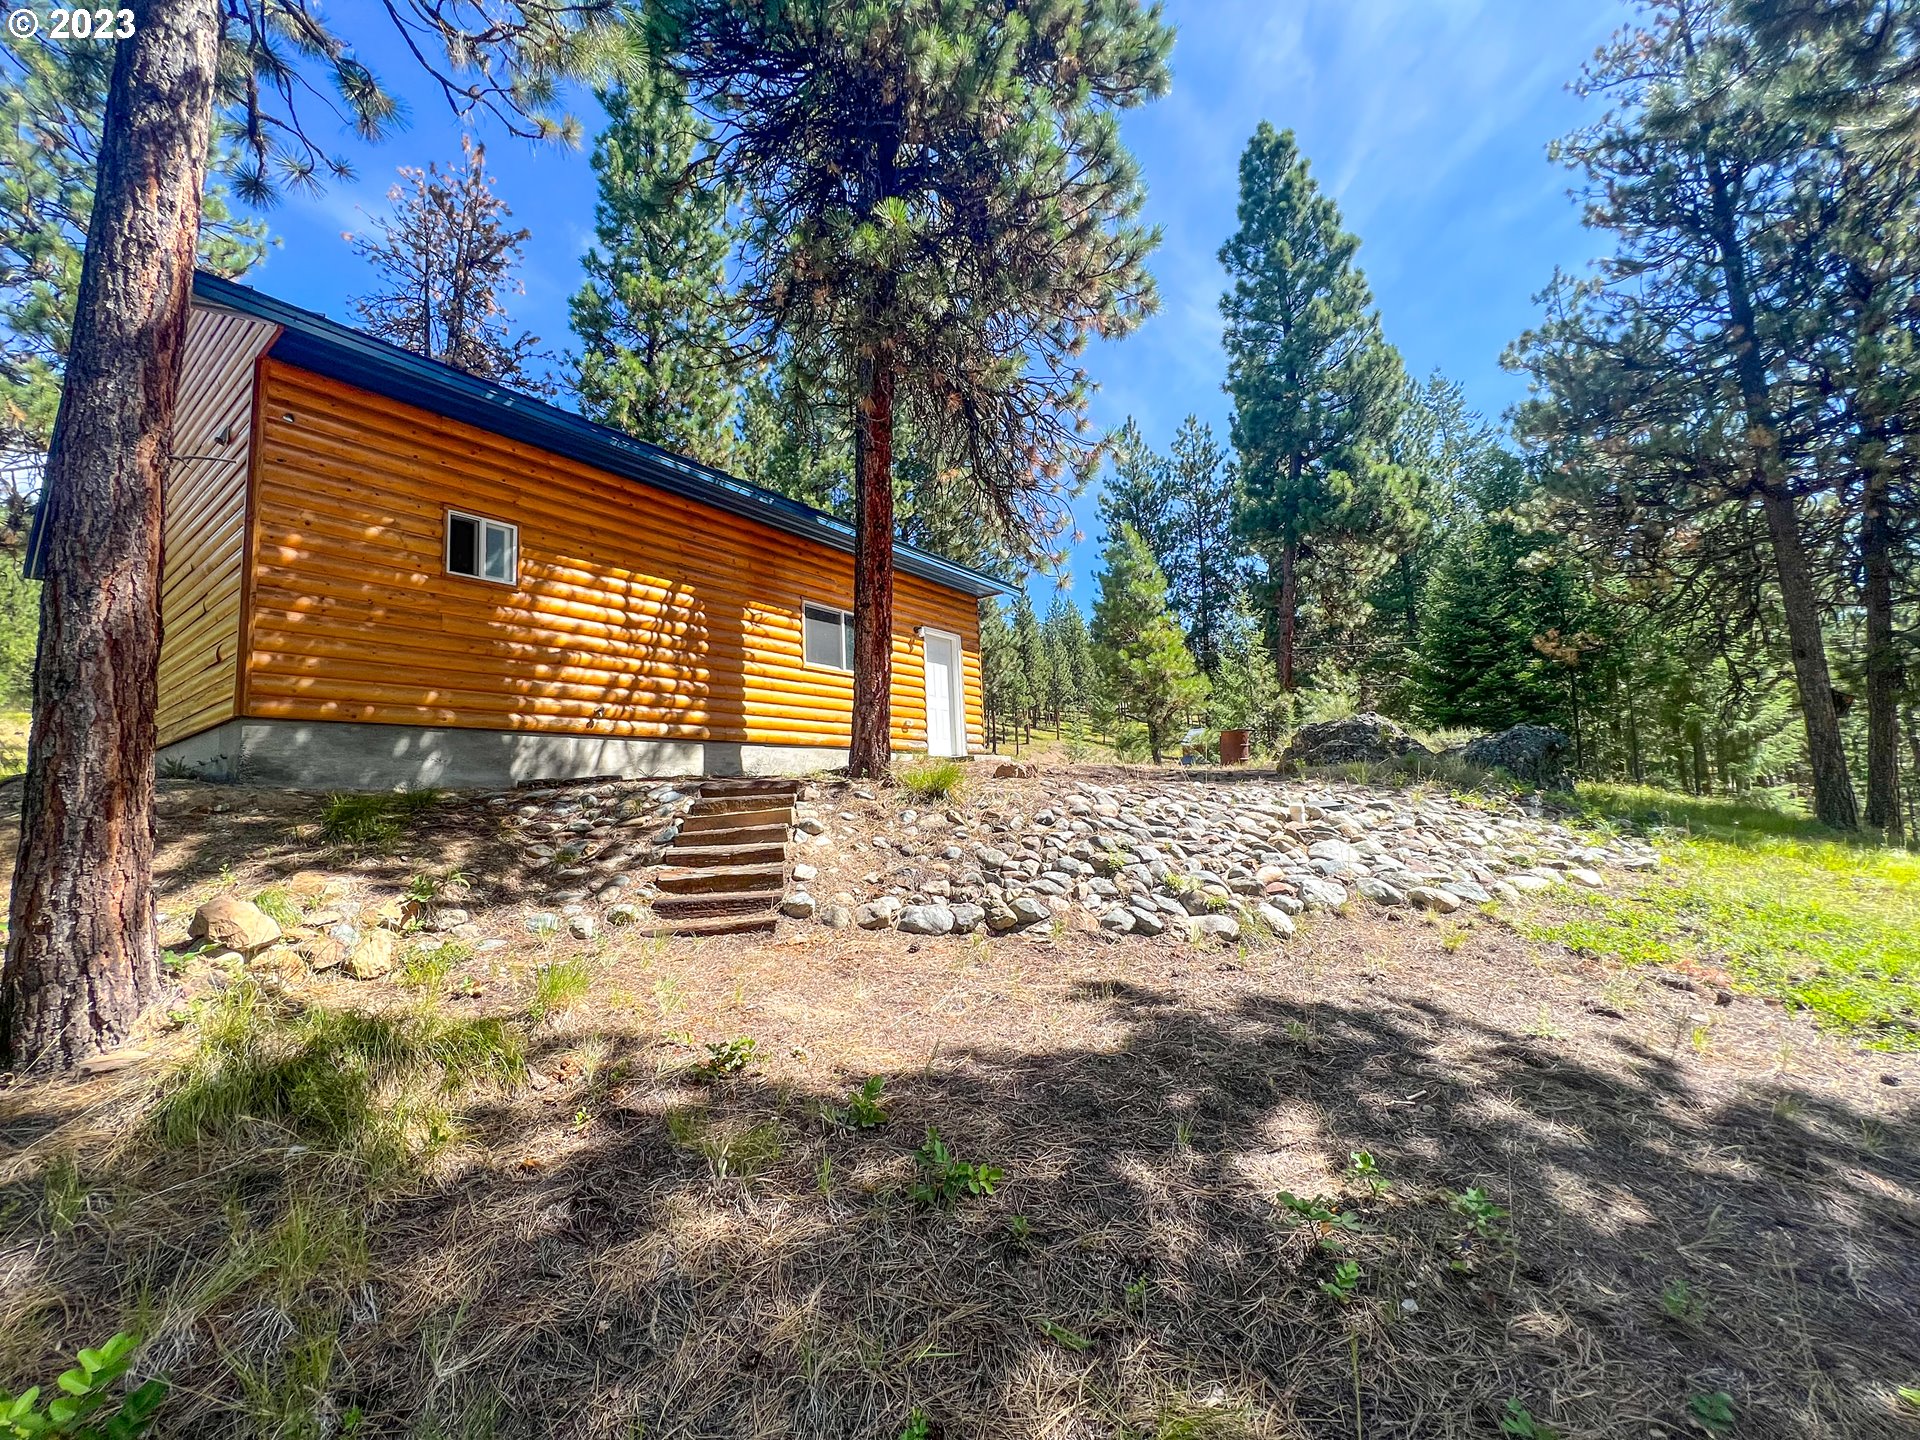 This buildable lot comes with excellent garage workshop space with septic already installed and connections to city sewer and water as well as electric onsite.  Start with your shop, and add a cabin!  Sumpter living at its best.